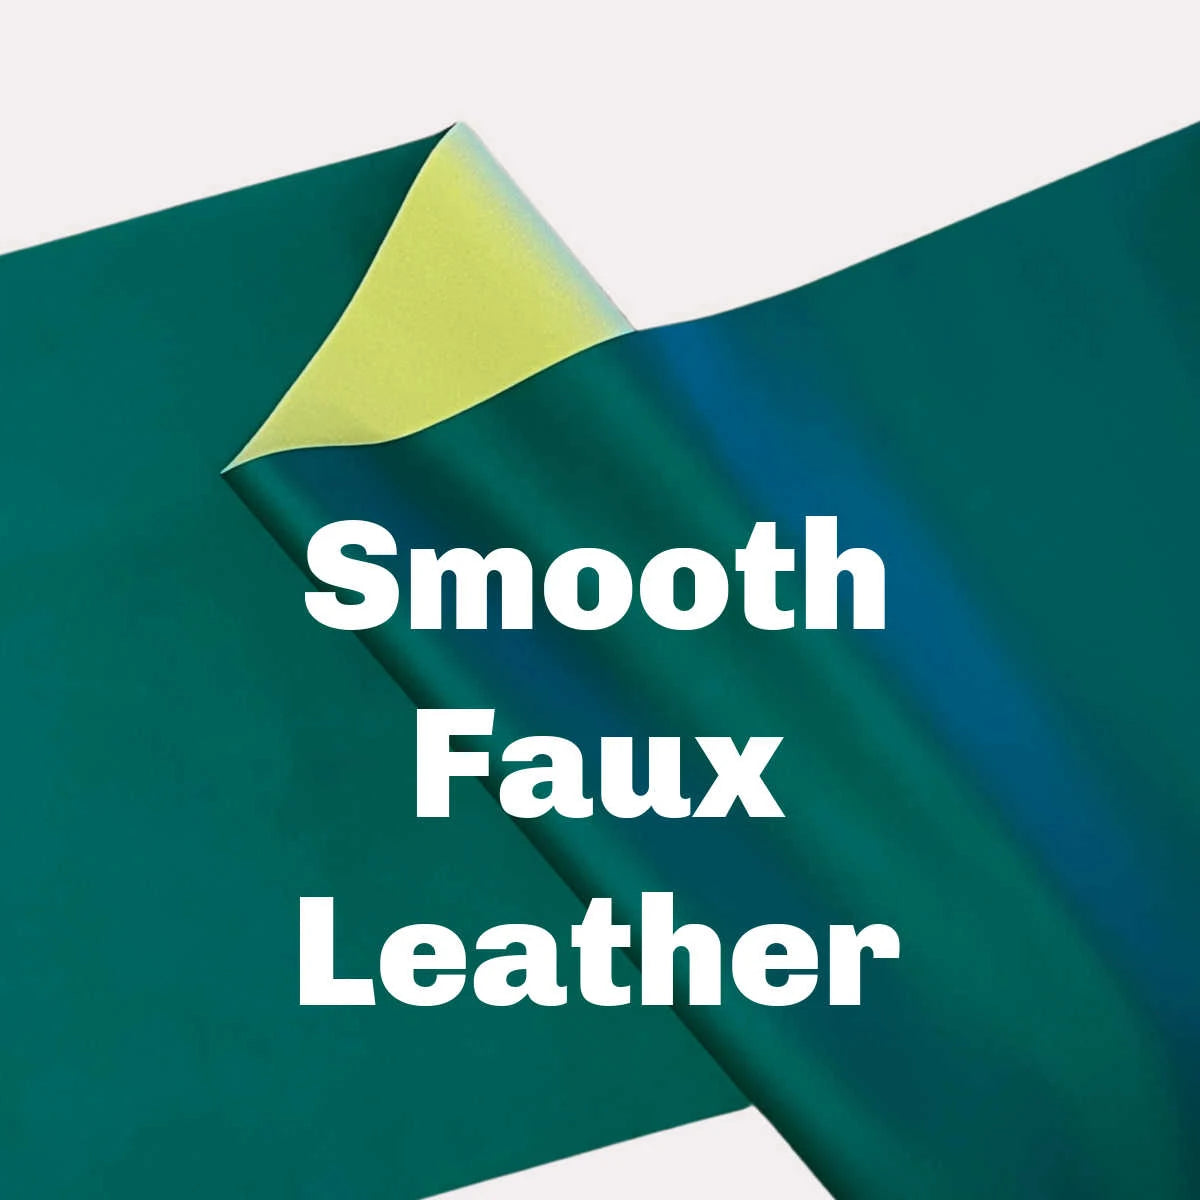 Smooth Faux Leather